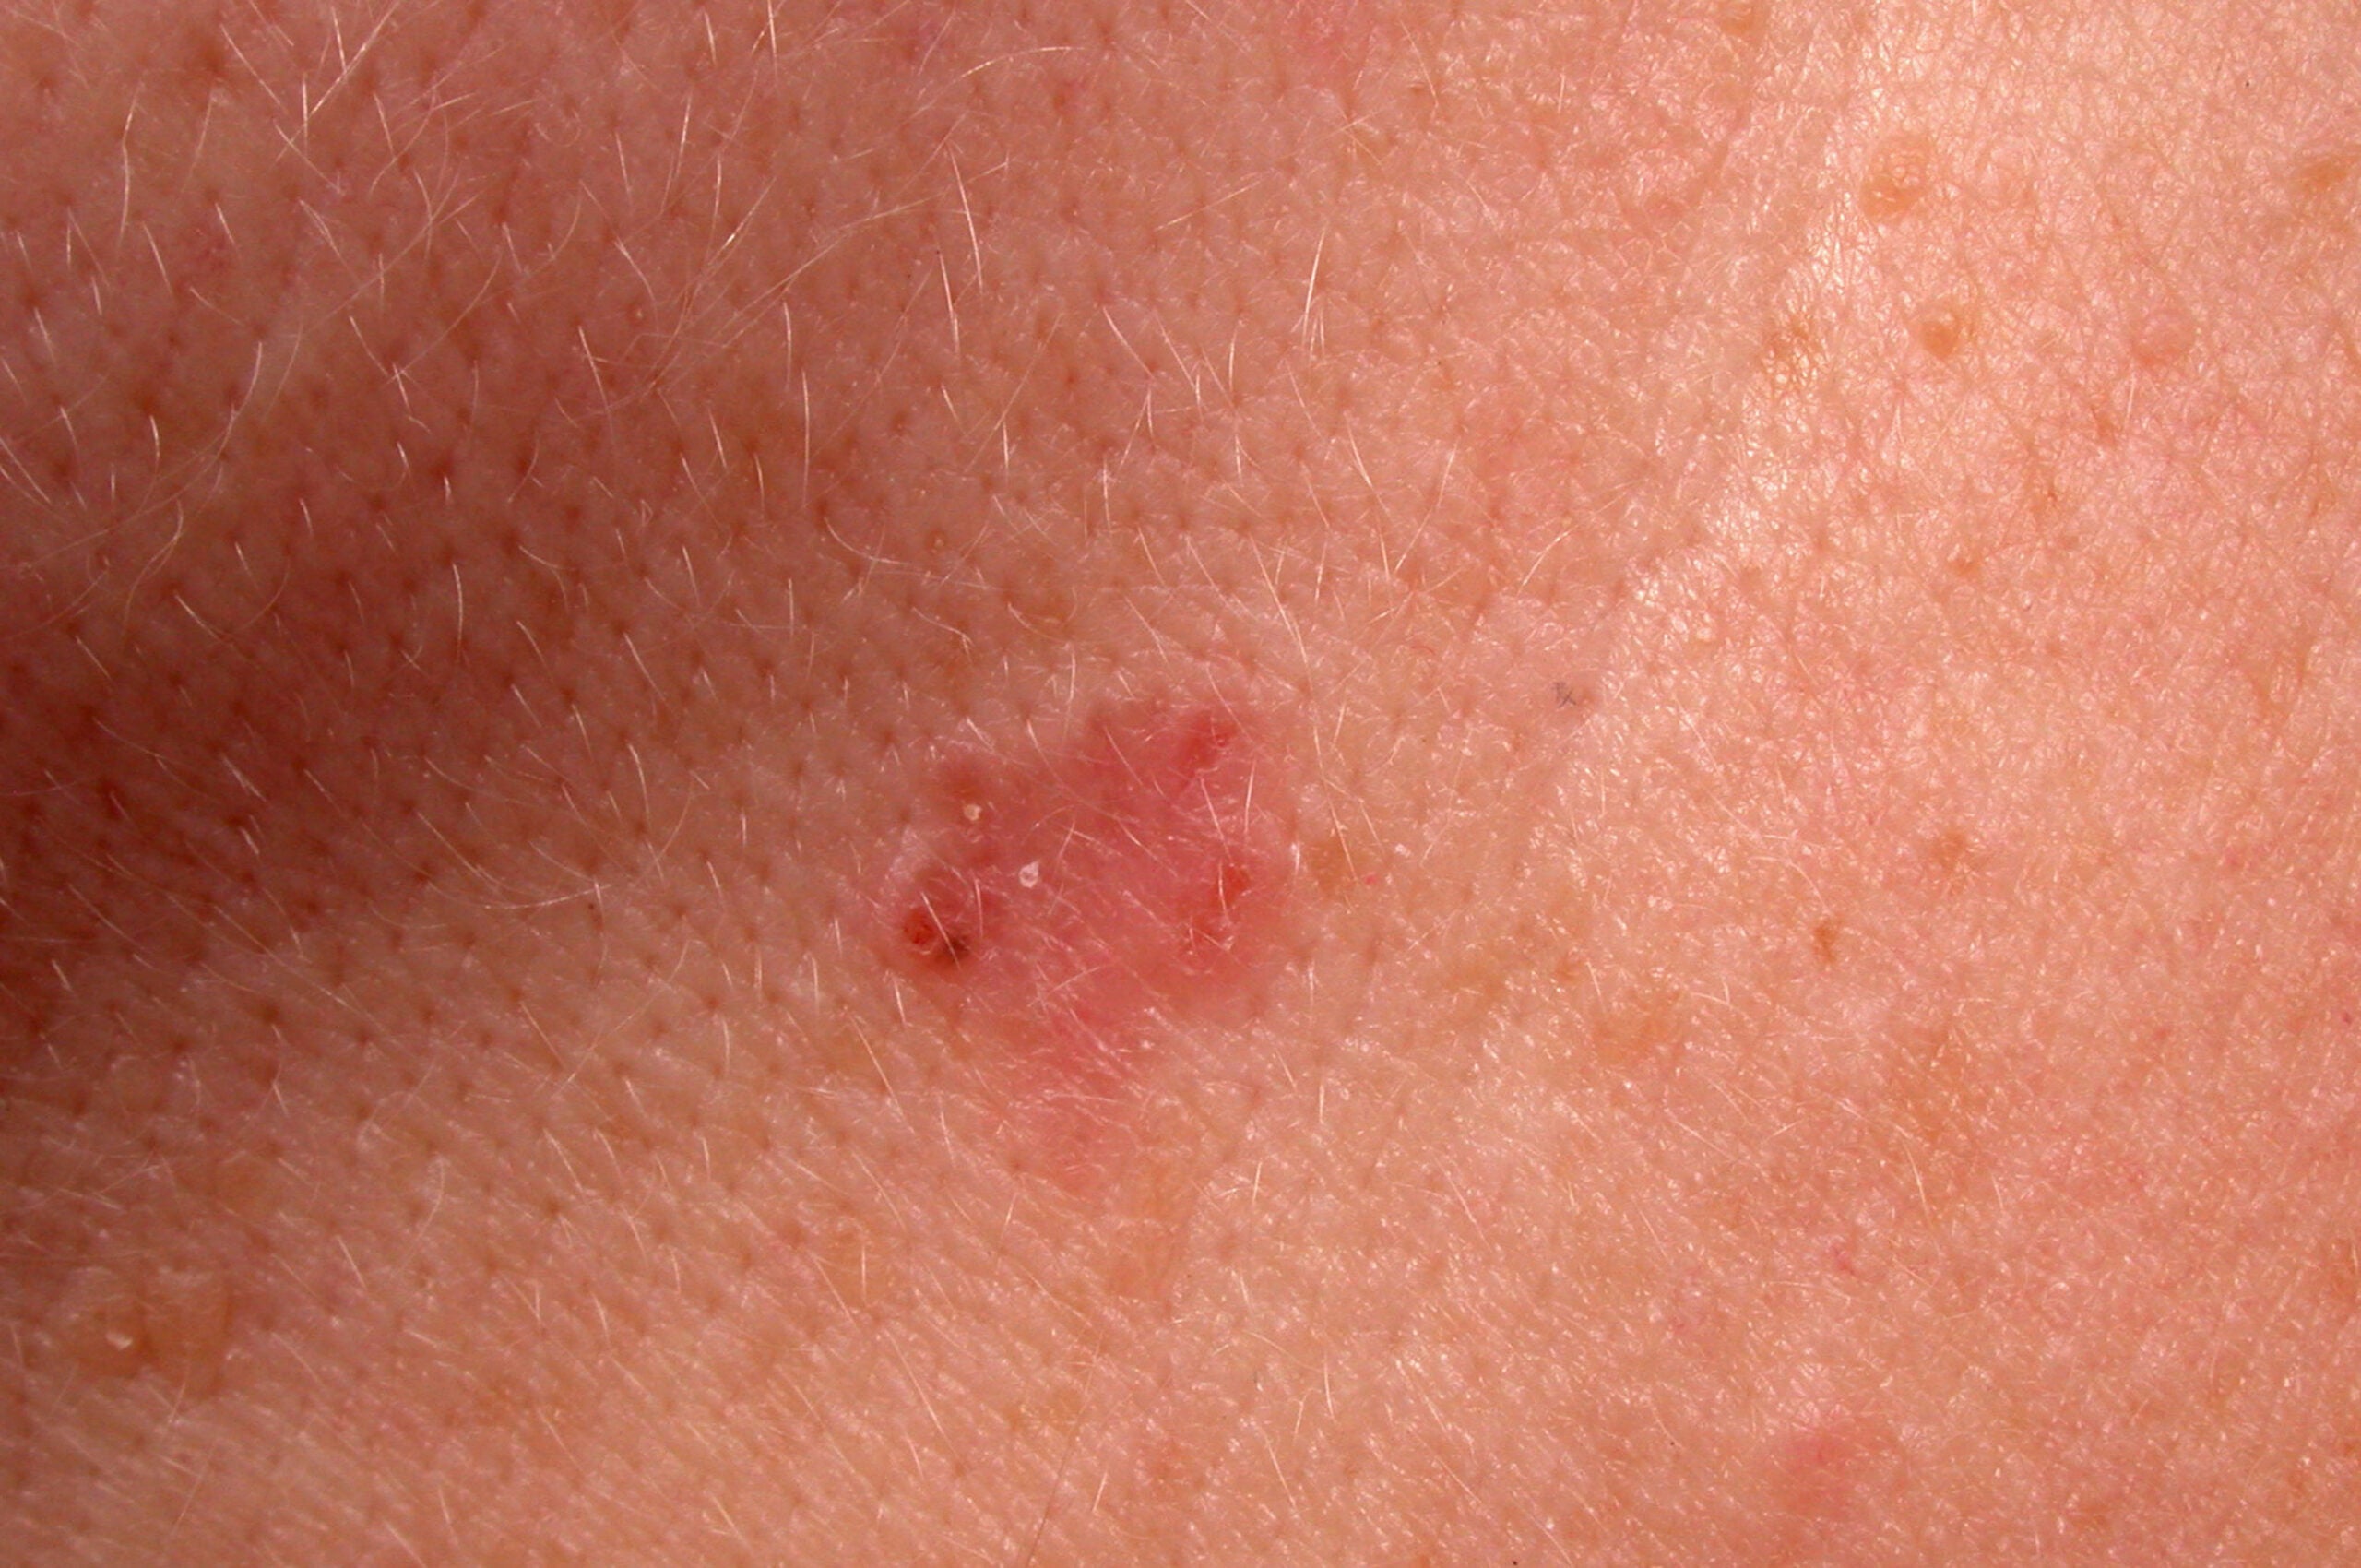 Warning Signs of Skin Cancer: Pictures, Diagnosis & More